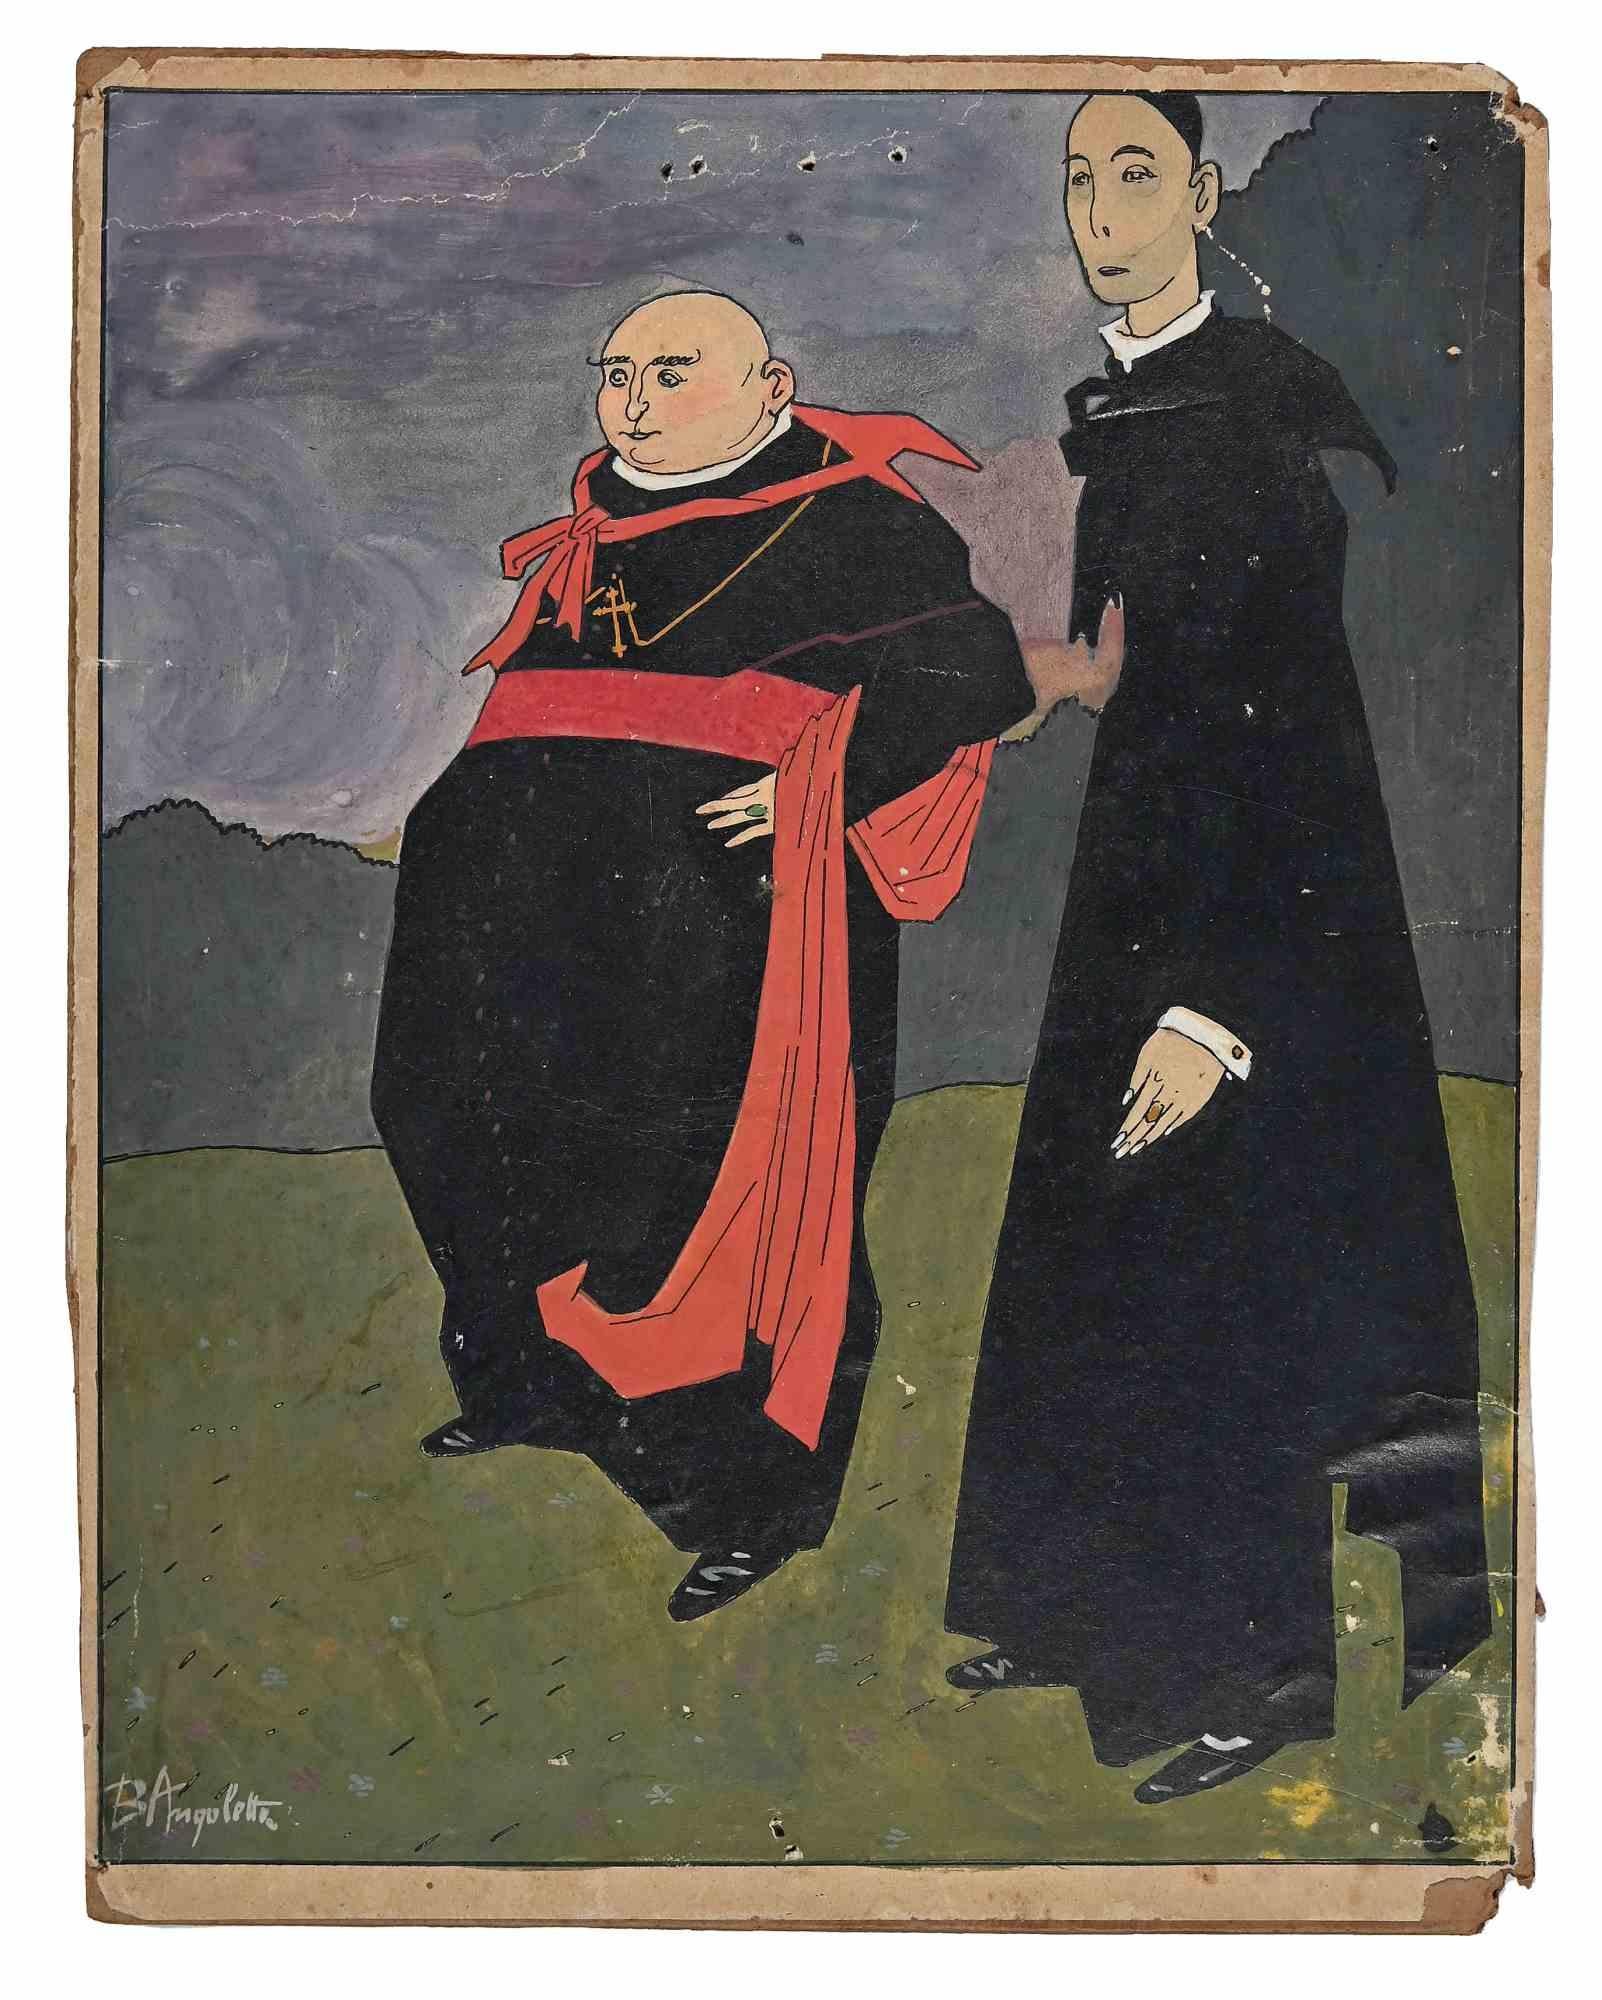 Priests - Original China Ink and Tempera by Bruno Angoletta - Early 20th Century